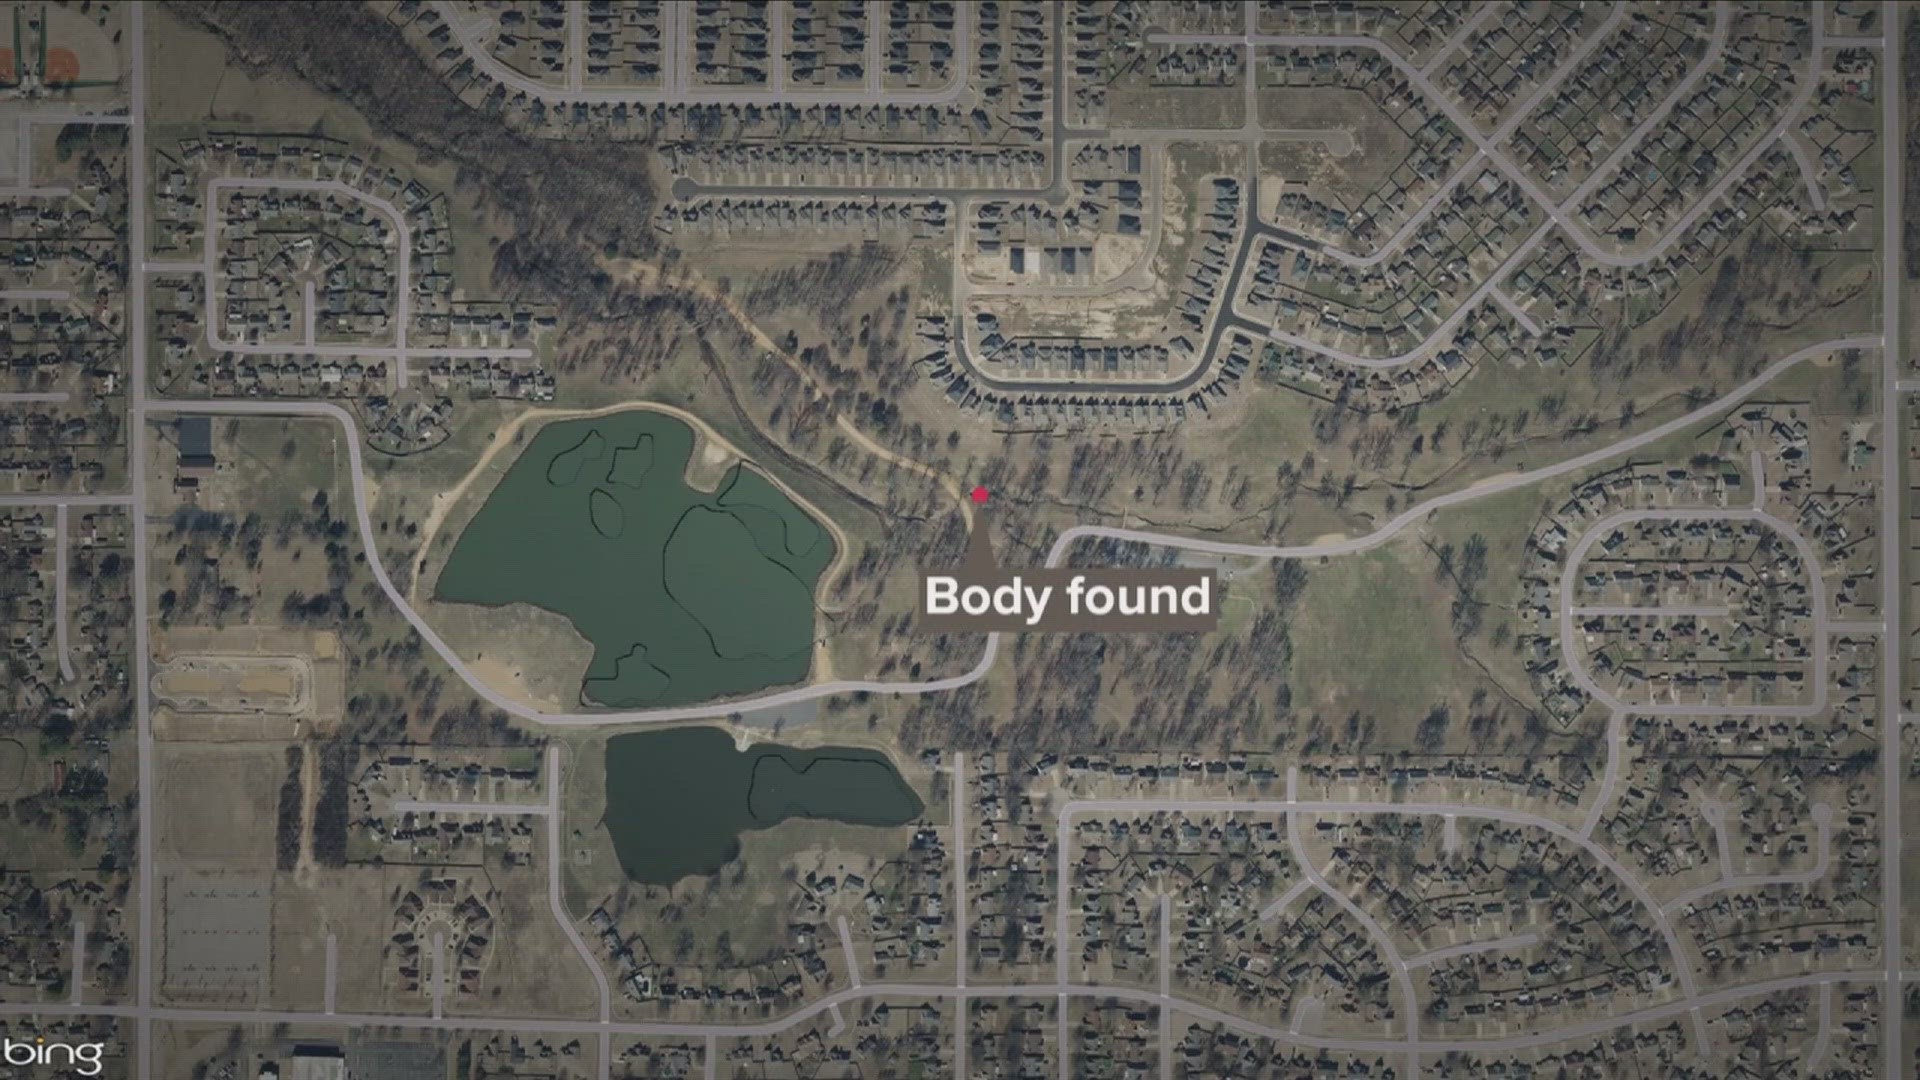 Police are investigating after human remains were found over the weekend at Central Park in Southaven, MS.